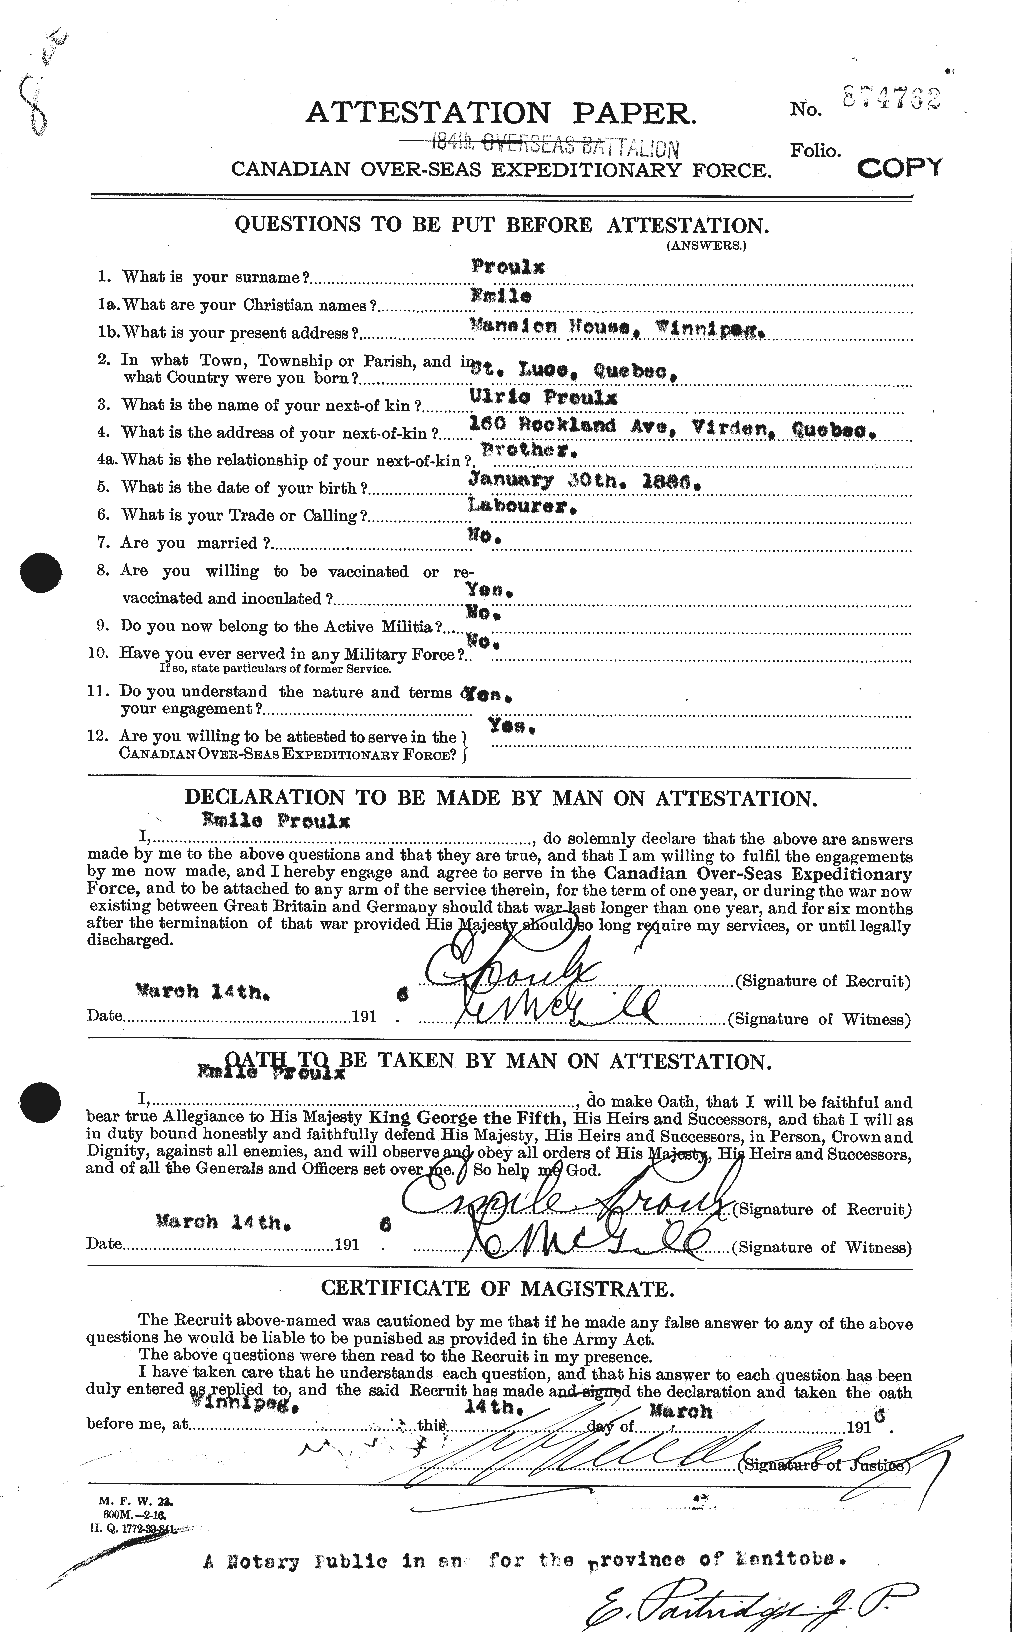 Personnel Records of the First World War - CEF 591551a